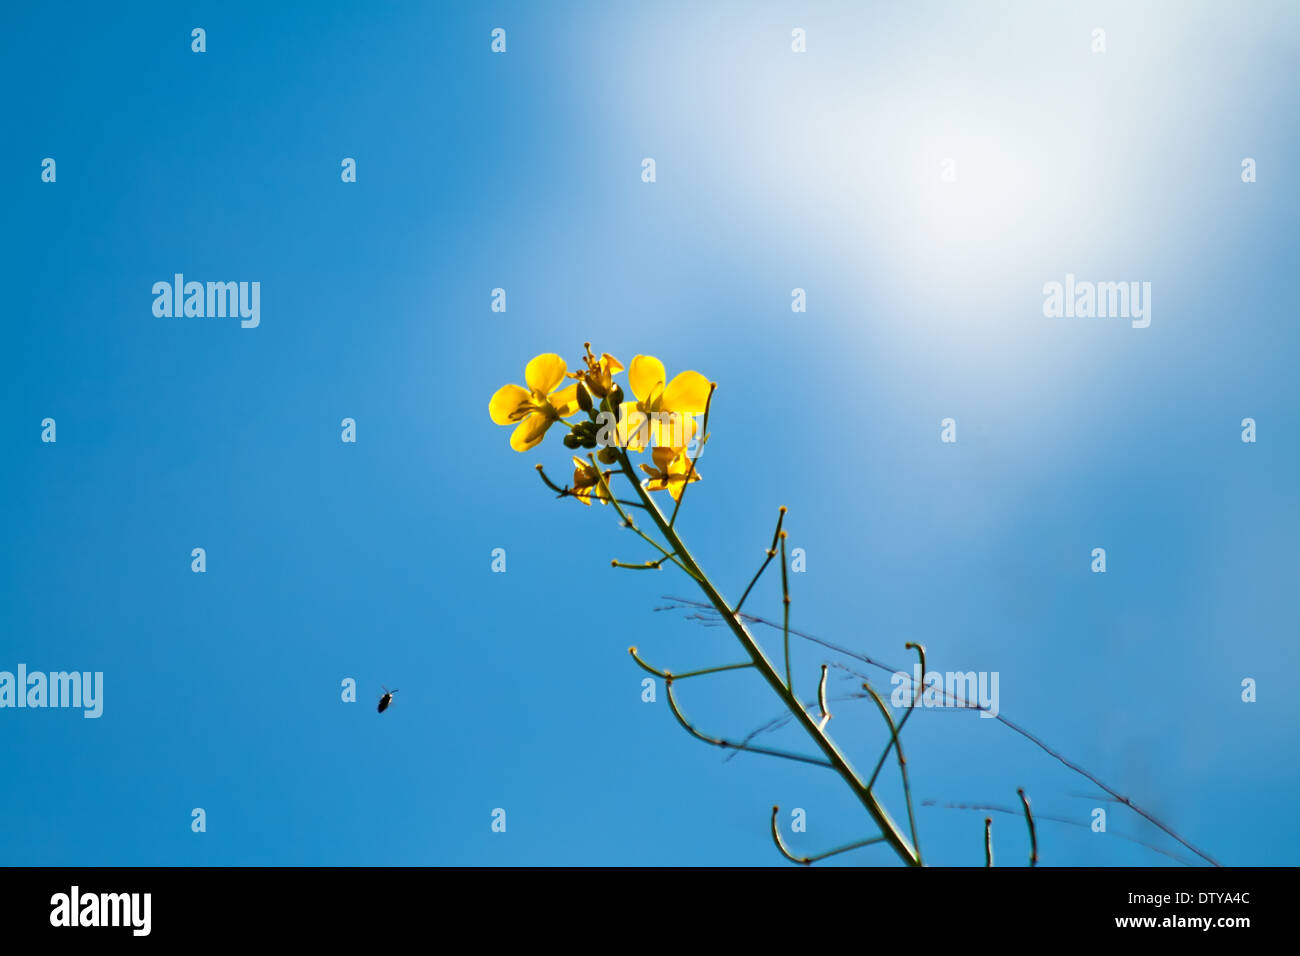 A Bee Flying Towards Yellow Flowers In The Blue Sky, Looking Up Stock Photo